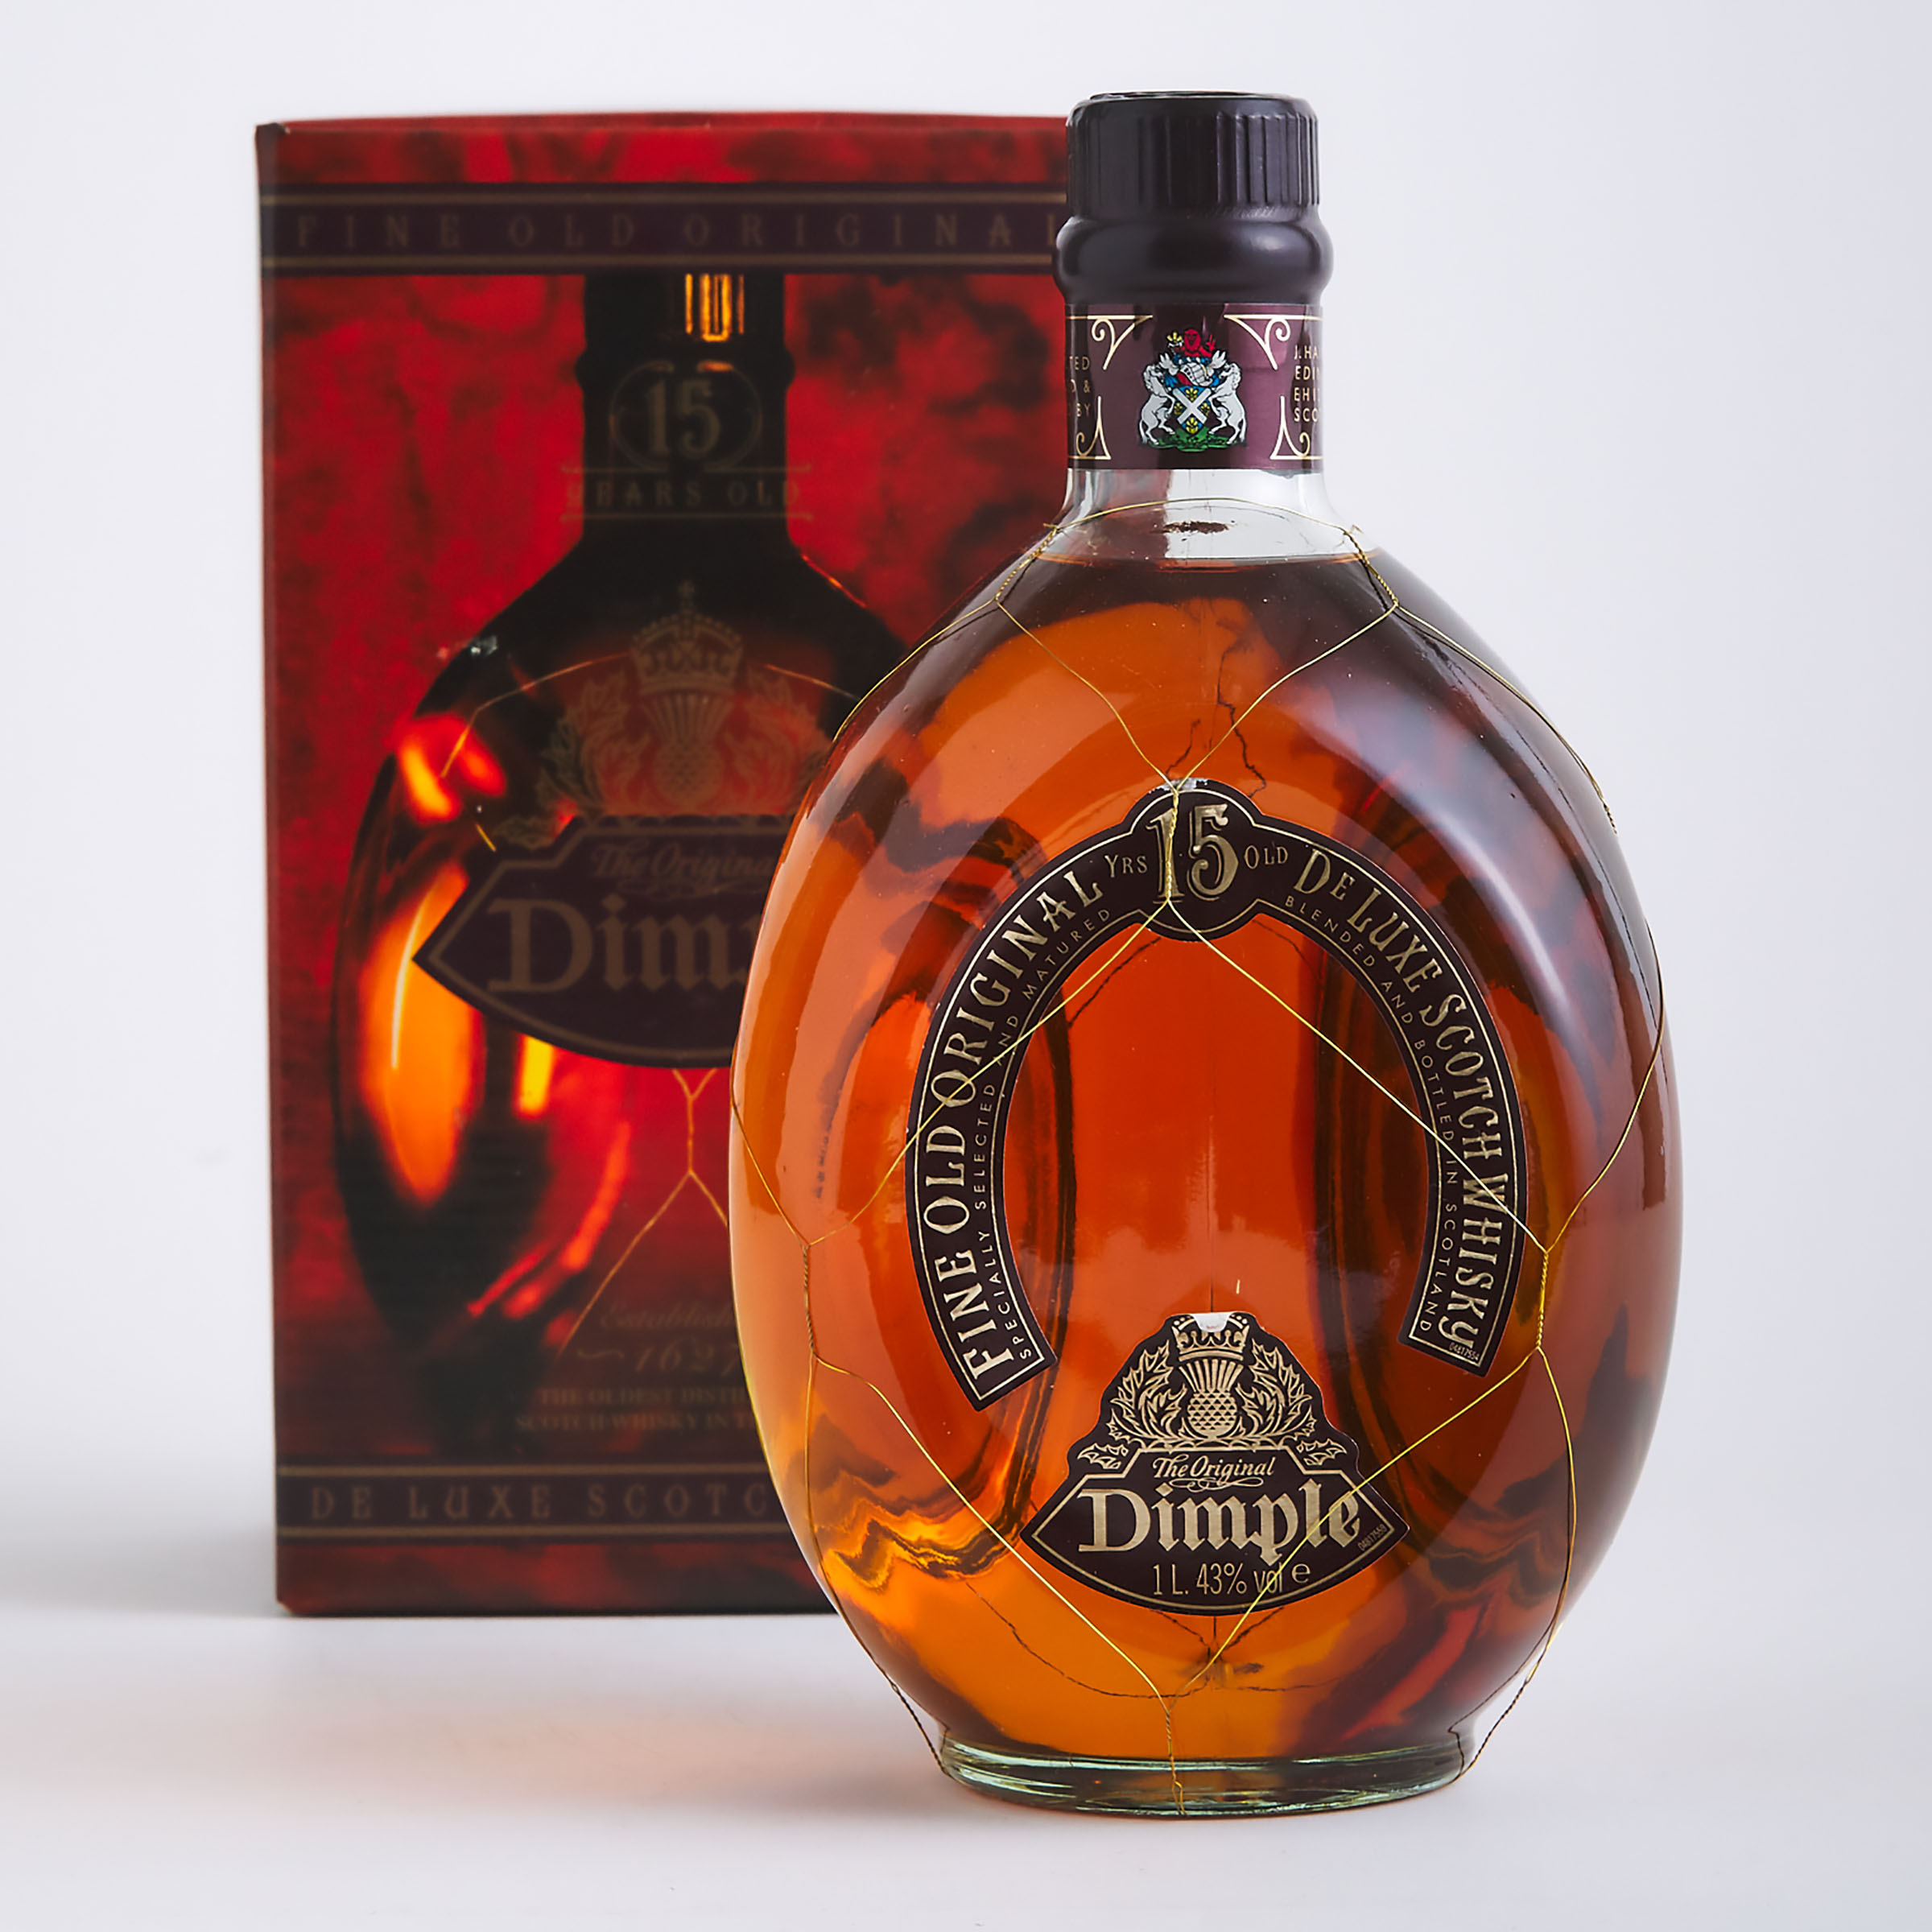 DIMPLE BLENDED SCOTCH WHISKY 15 YEARS (ONE 1000 ML)